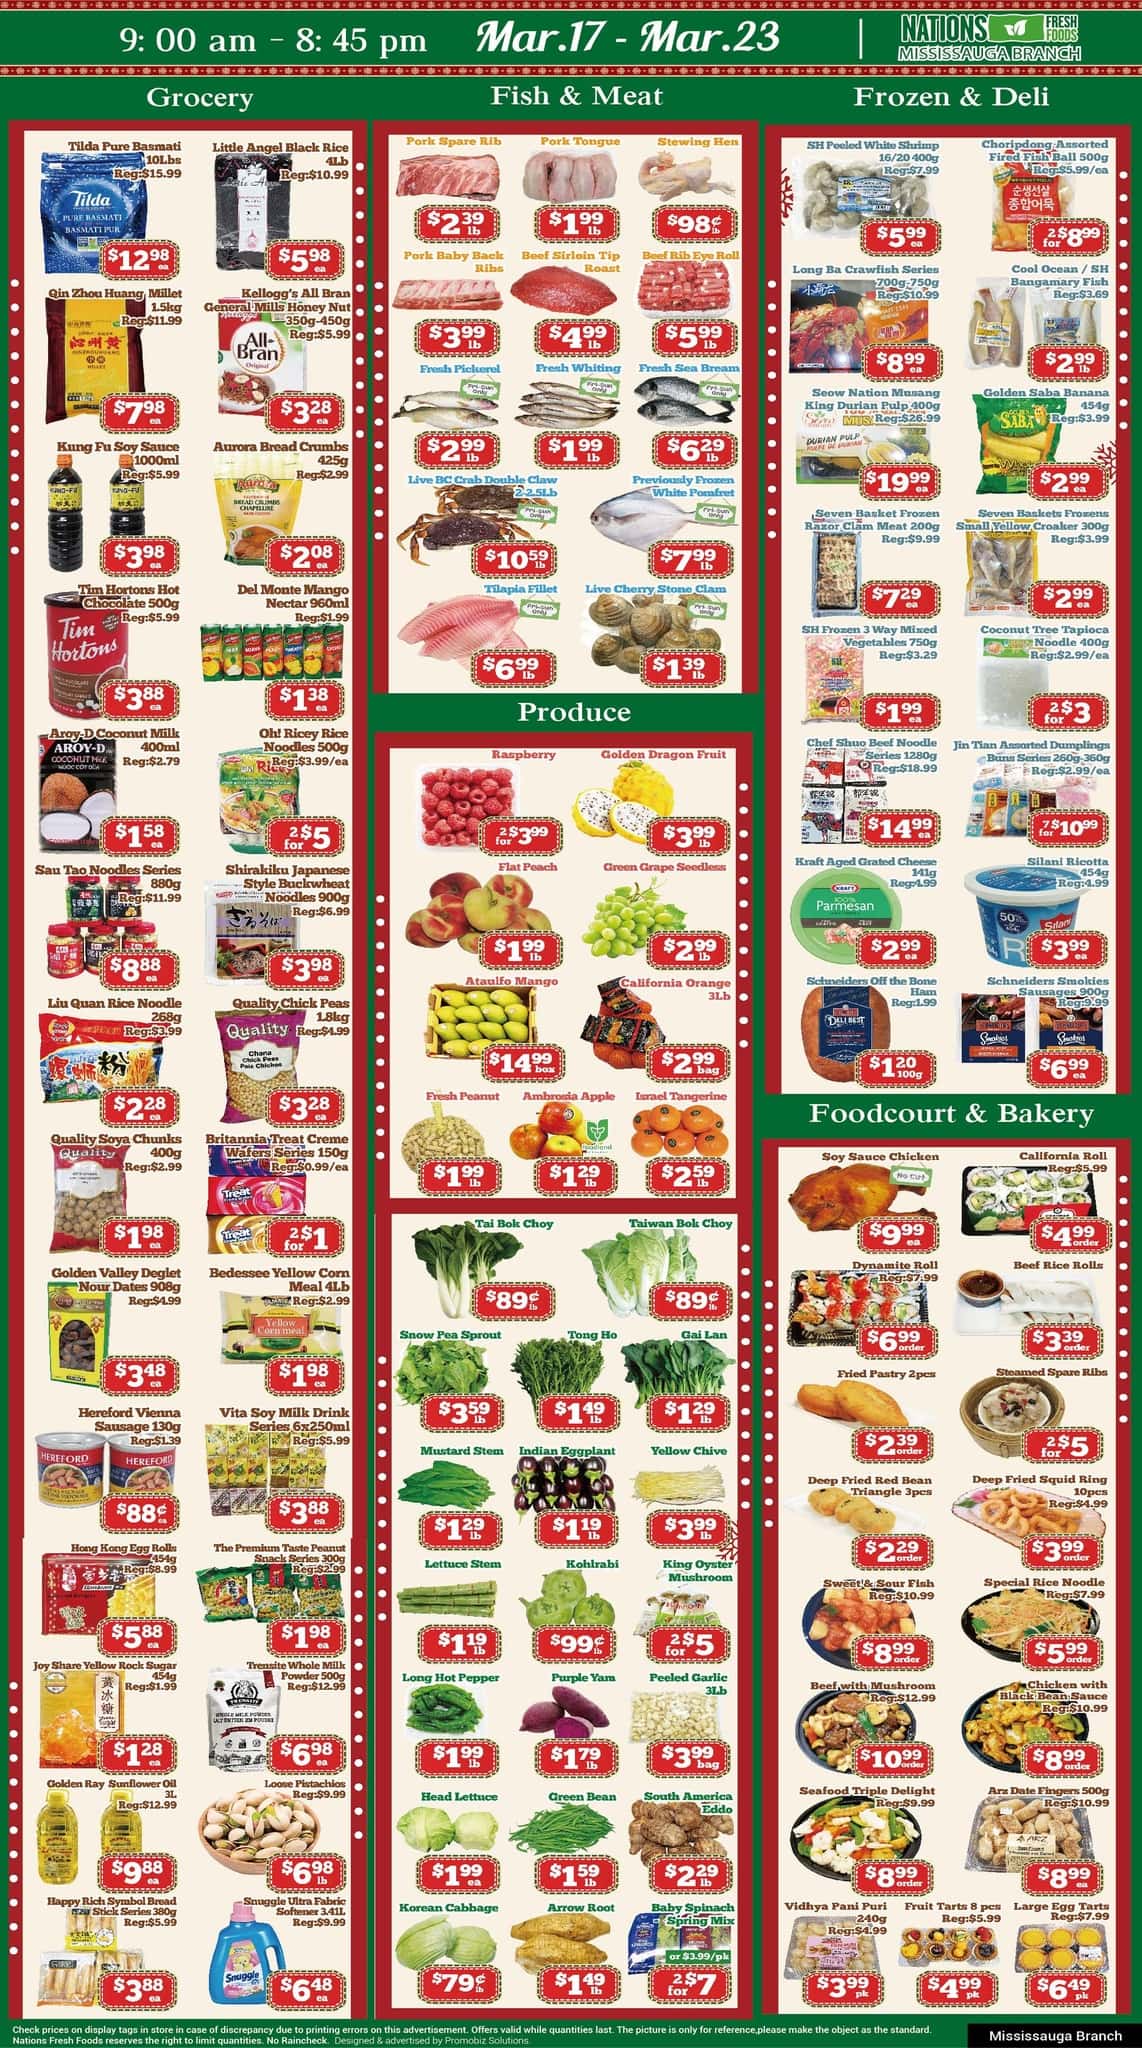 Nations Fresh Foods - Georgetown - Weekly Flyer Specials - Page 1